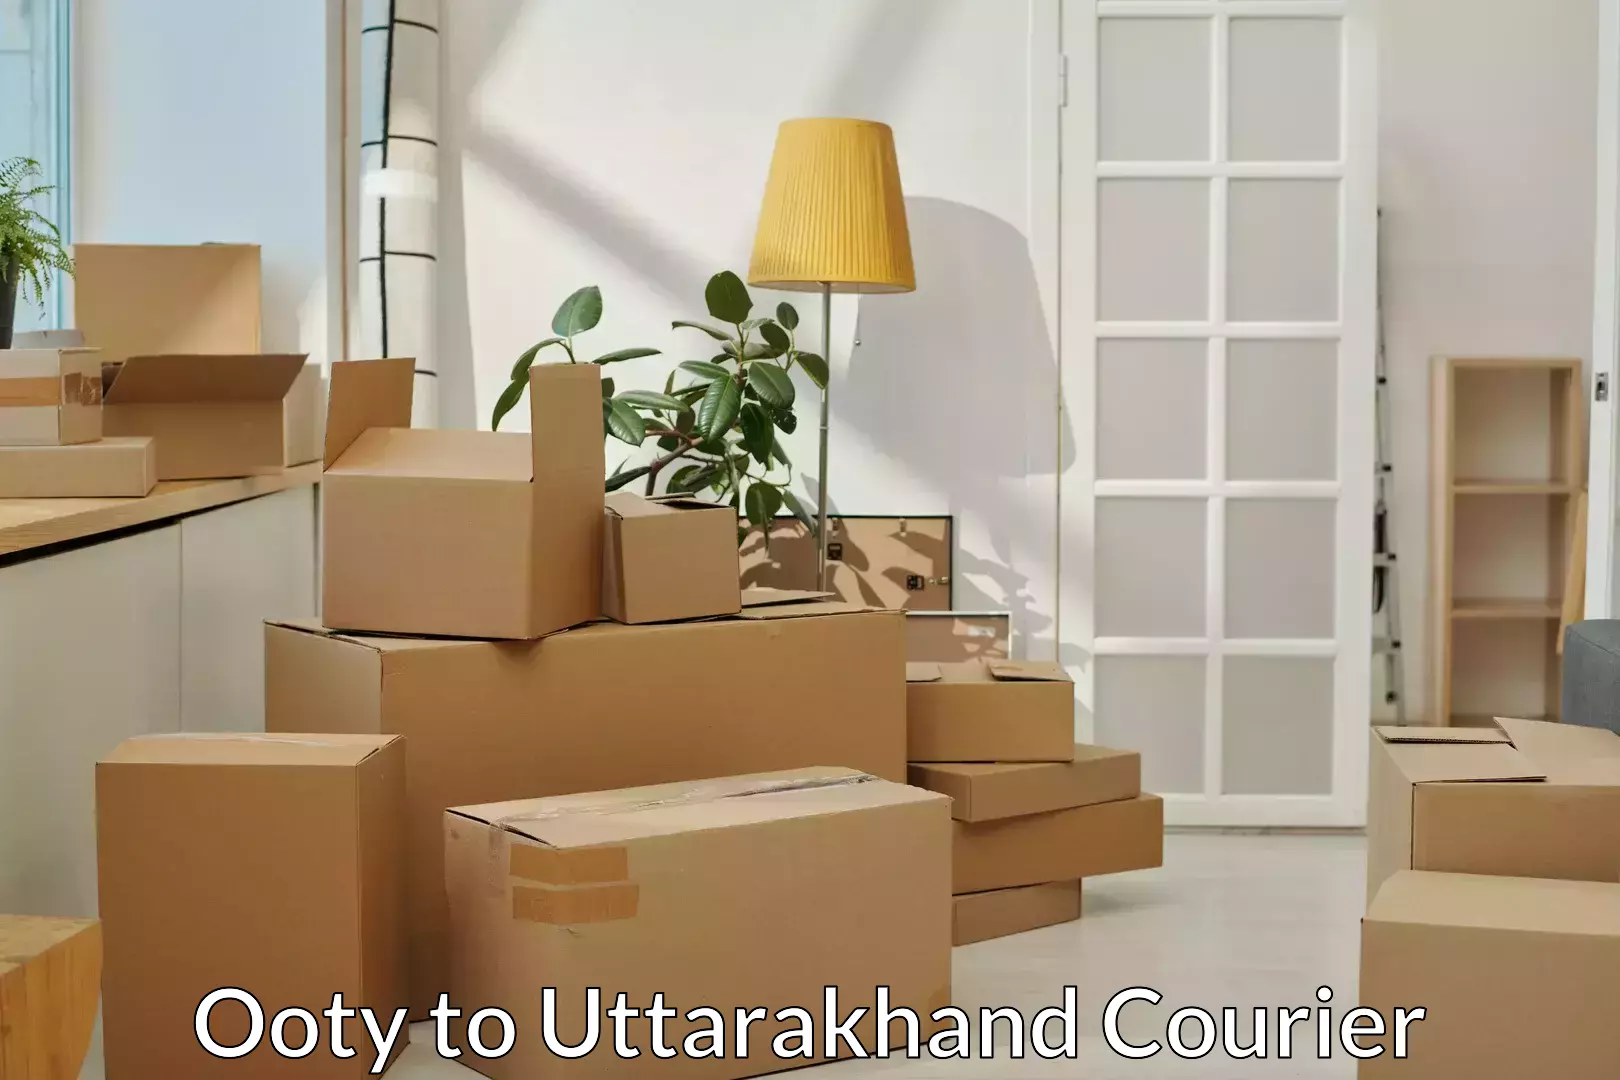 Professional moving company Ooty to Pauri